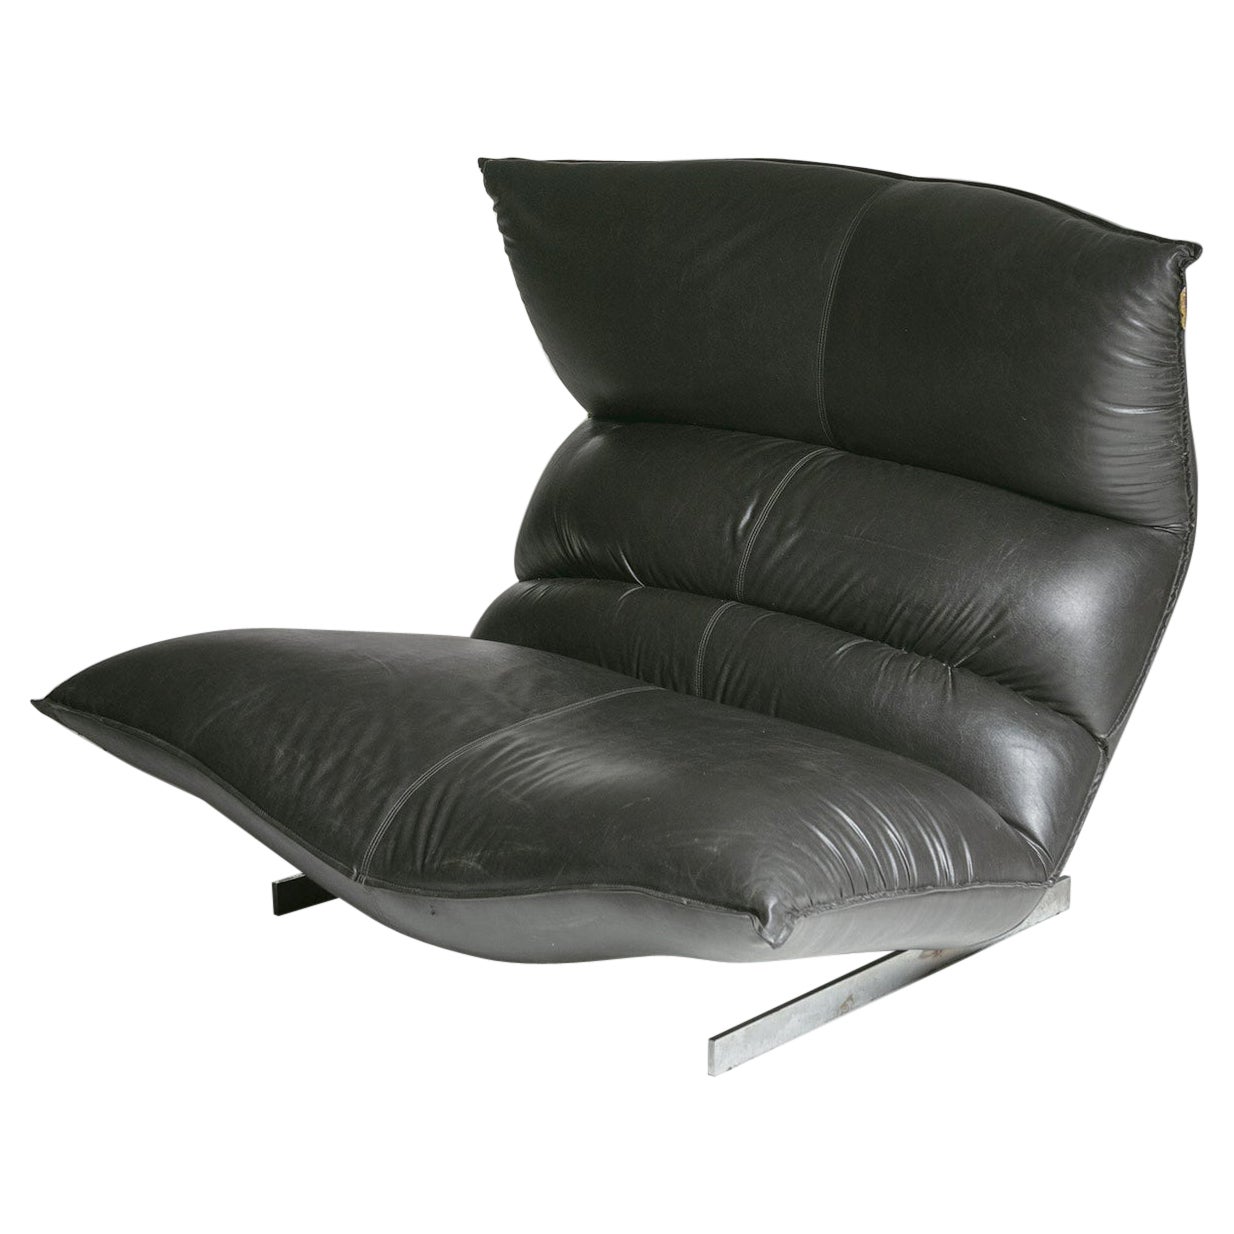 Modern Leather Lounge Chair "Canestrari" by Vittorio Varo, Italy, 1970s For Sale